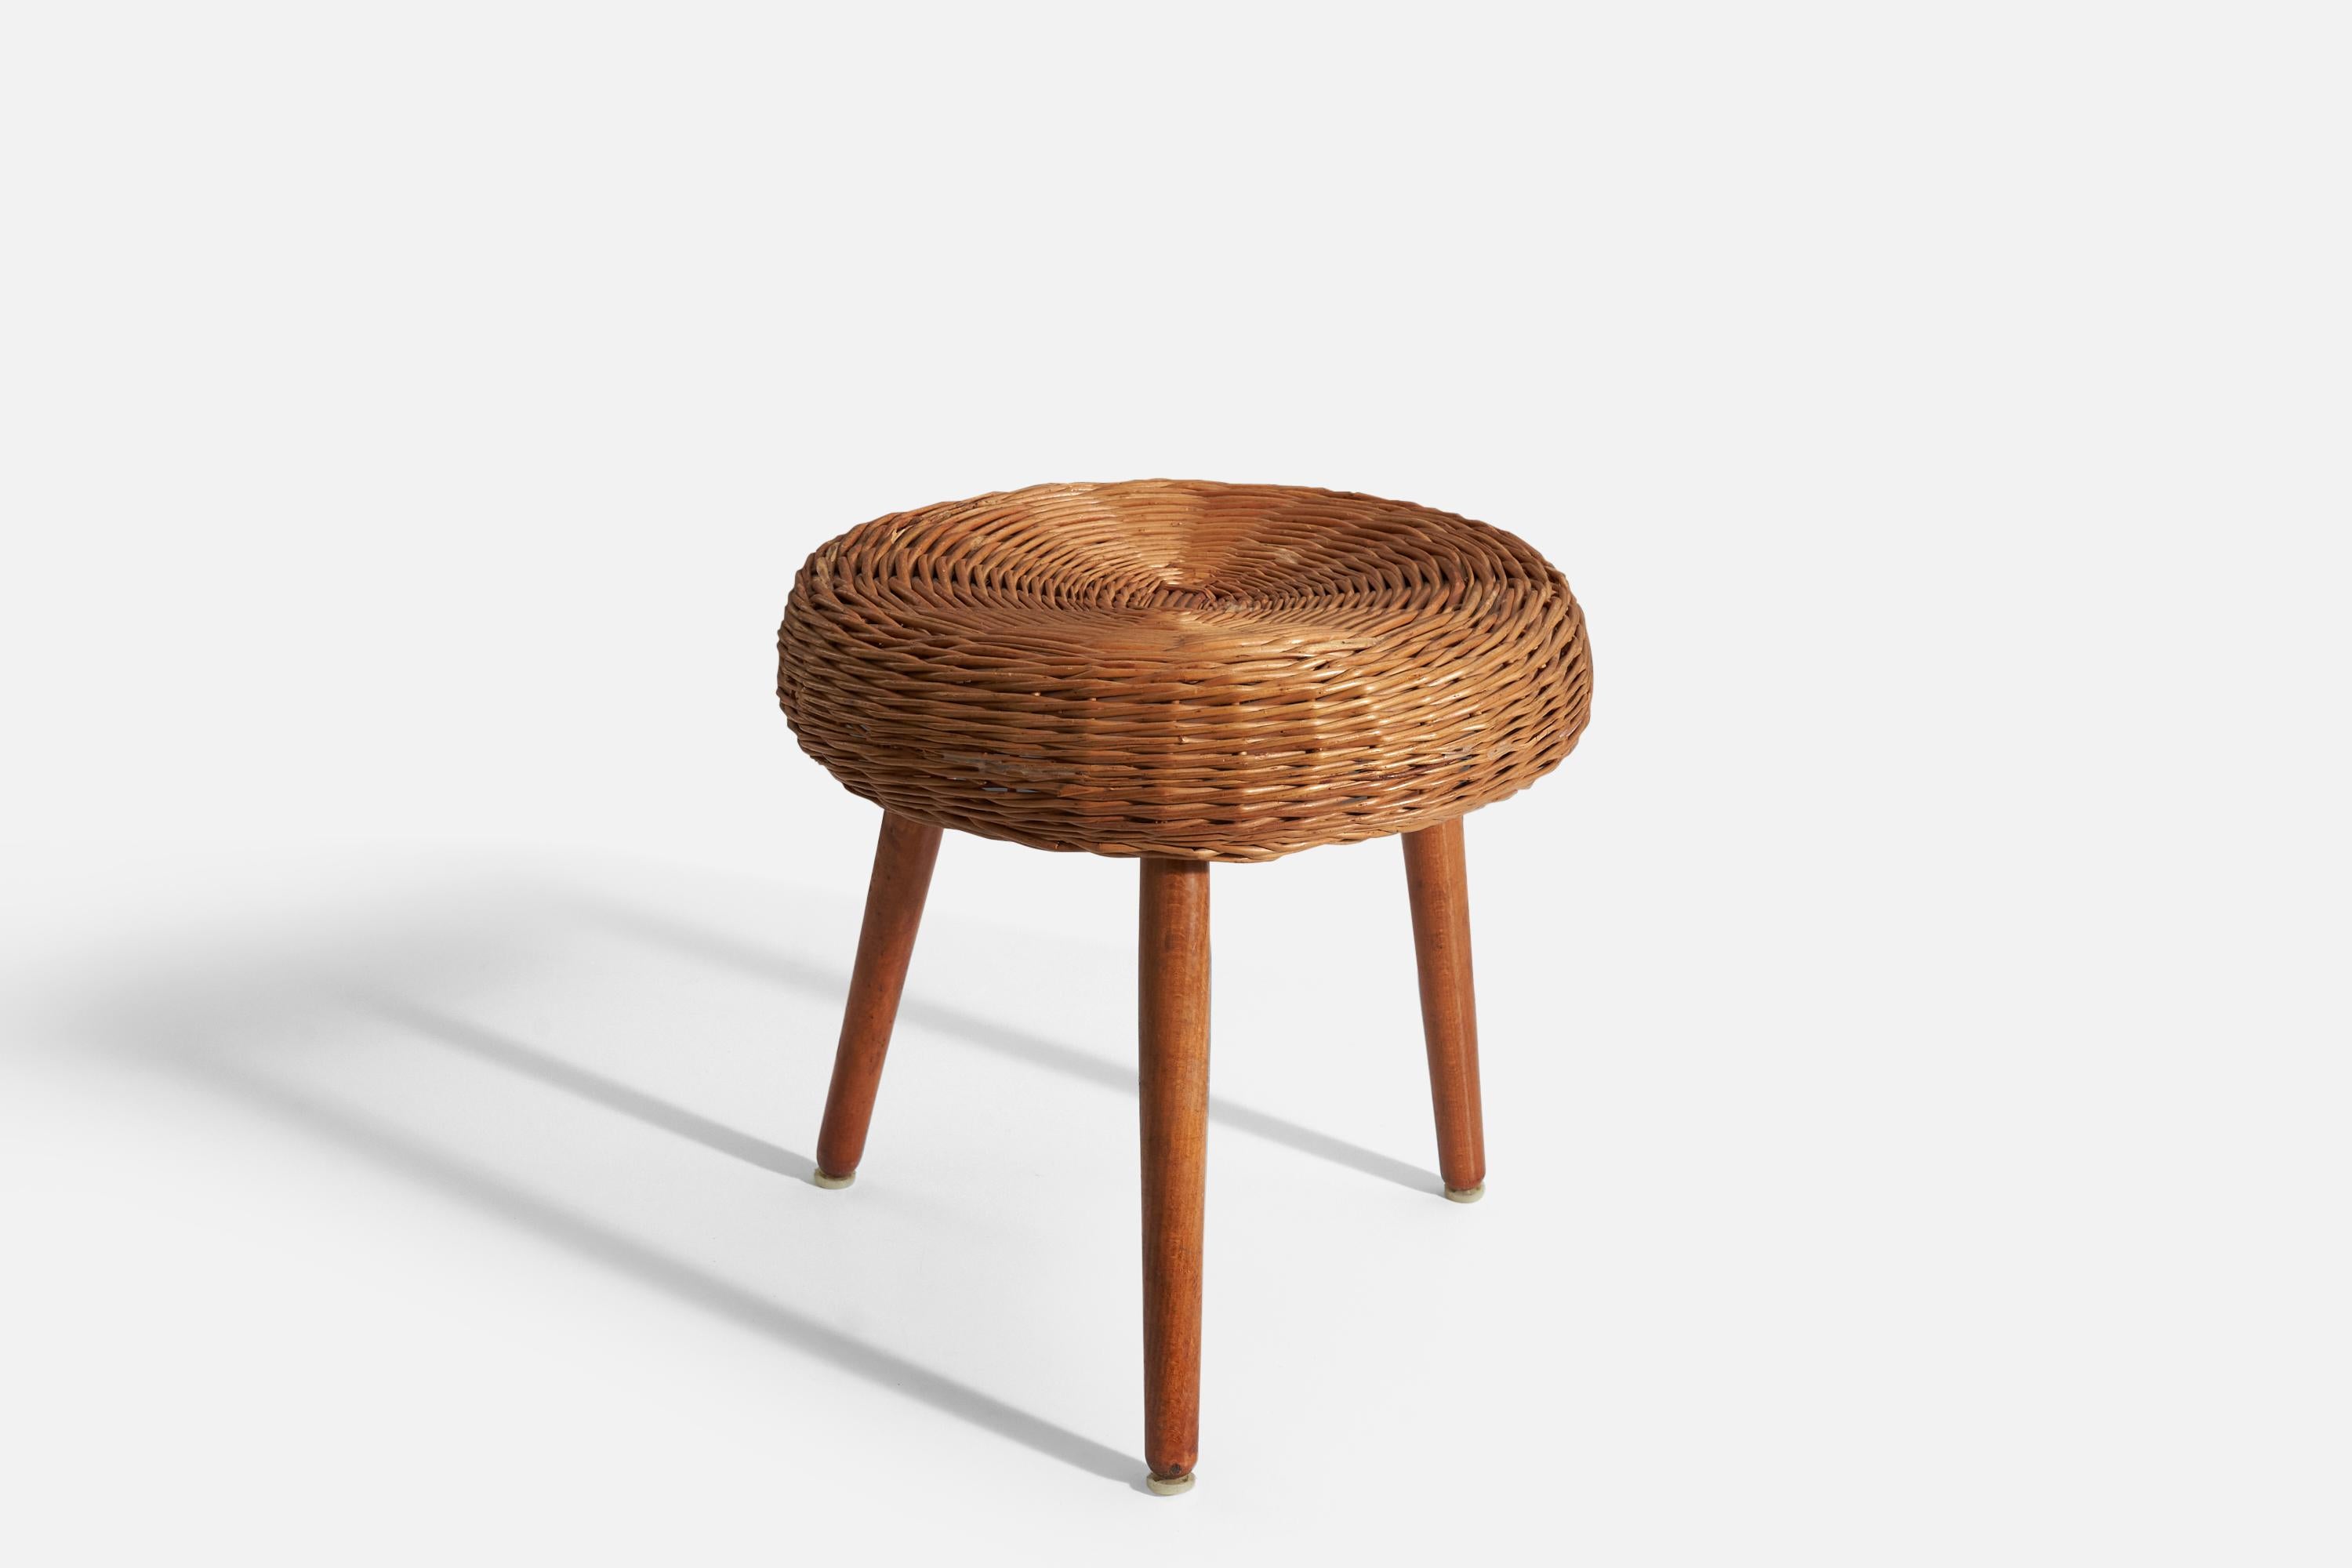 American Tony Paul 'Attributed' Stool, Wicker, United States, 1950s For Sale